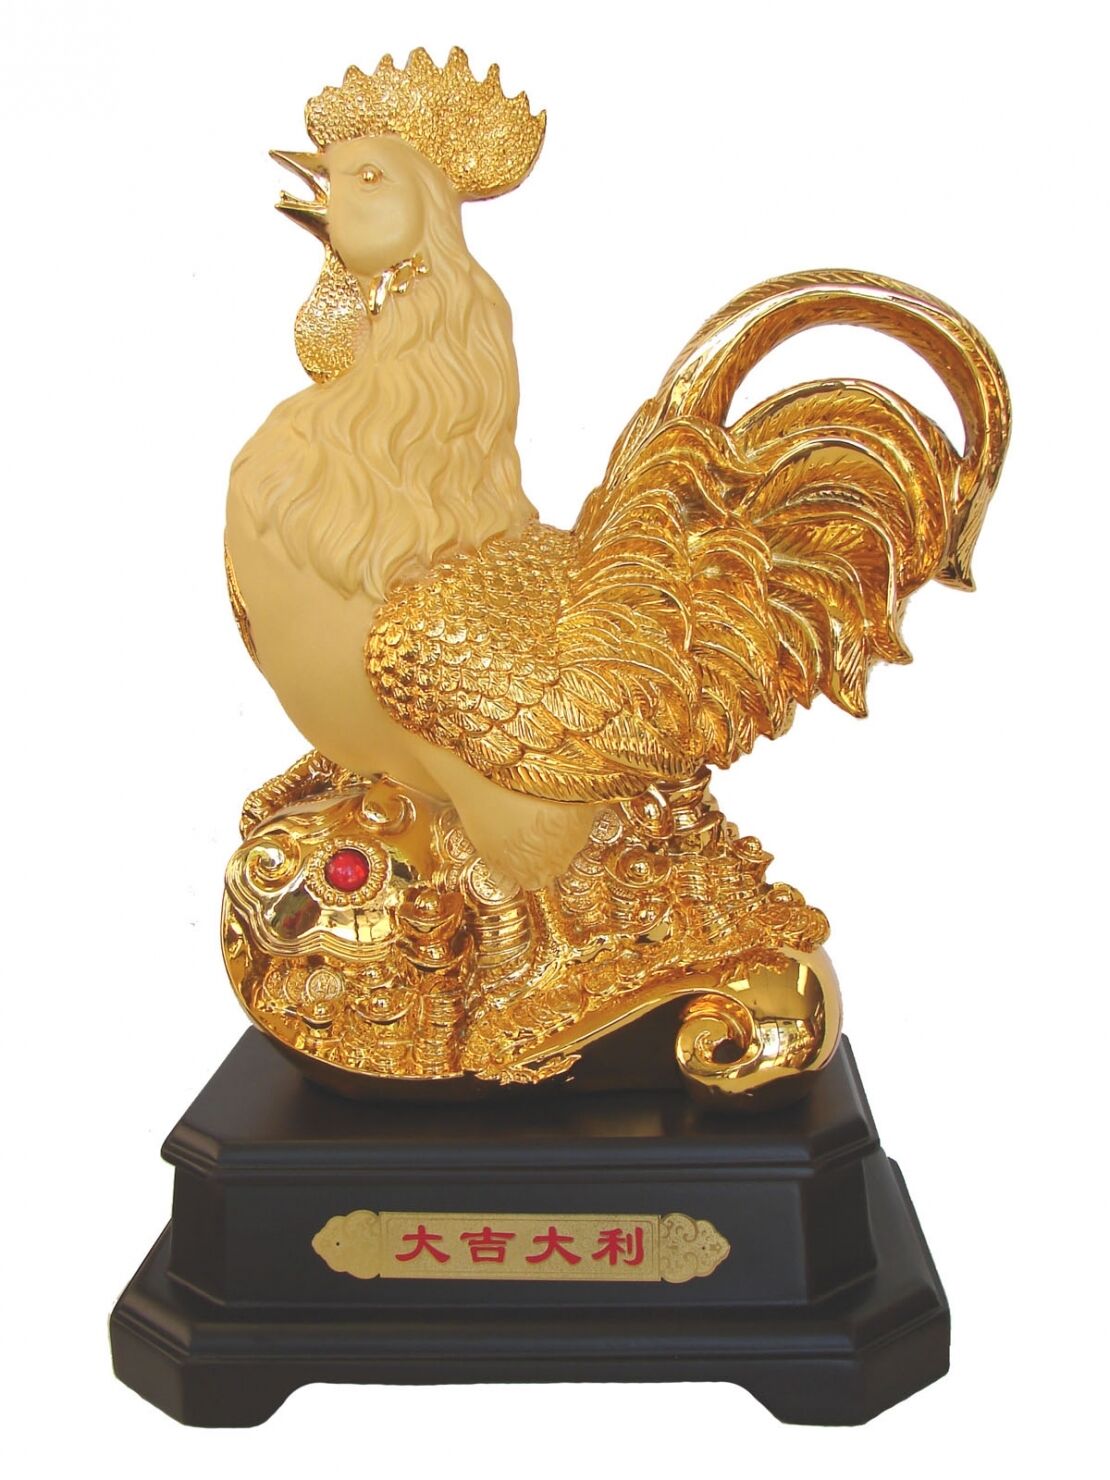 17 Inch Big Golden Rooster Statue for Year of Rooster